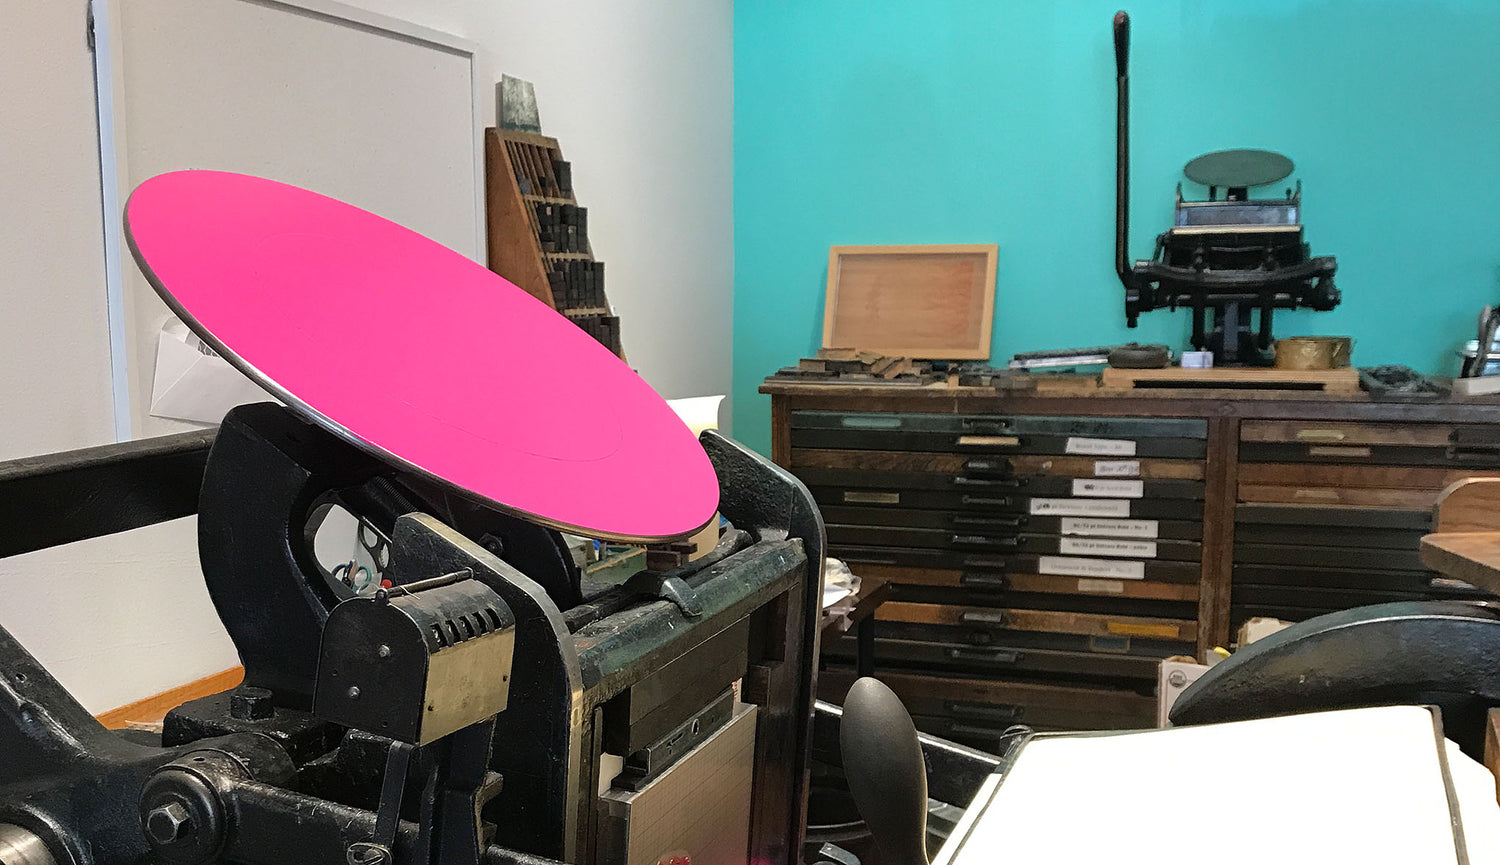 A vintage printing press in use with magenta pink ink is shown with printing equipment of the same era against a bright turquoise colored wall.